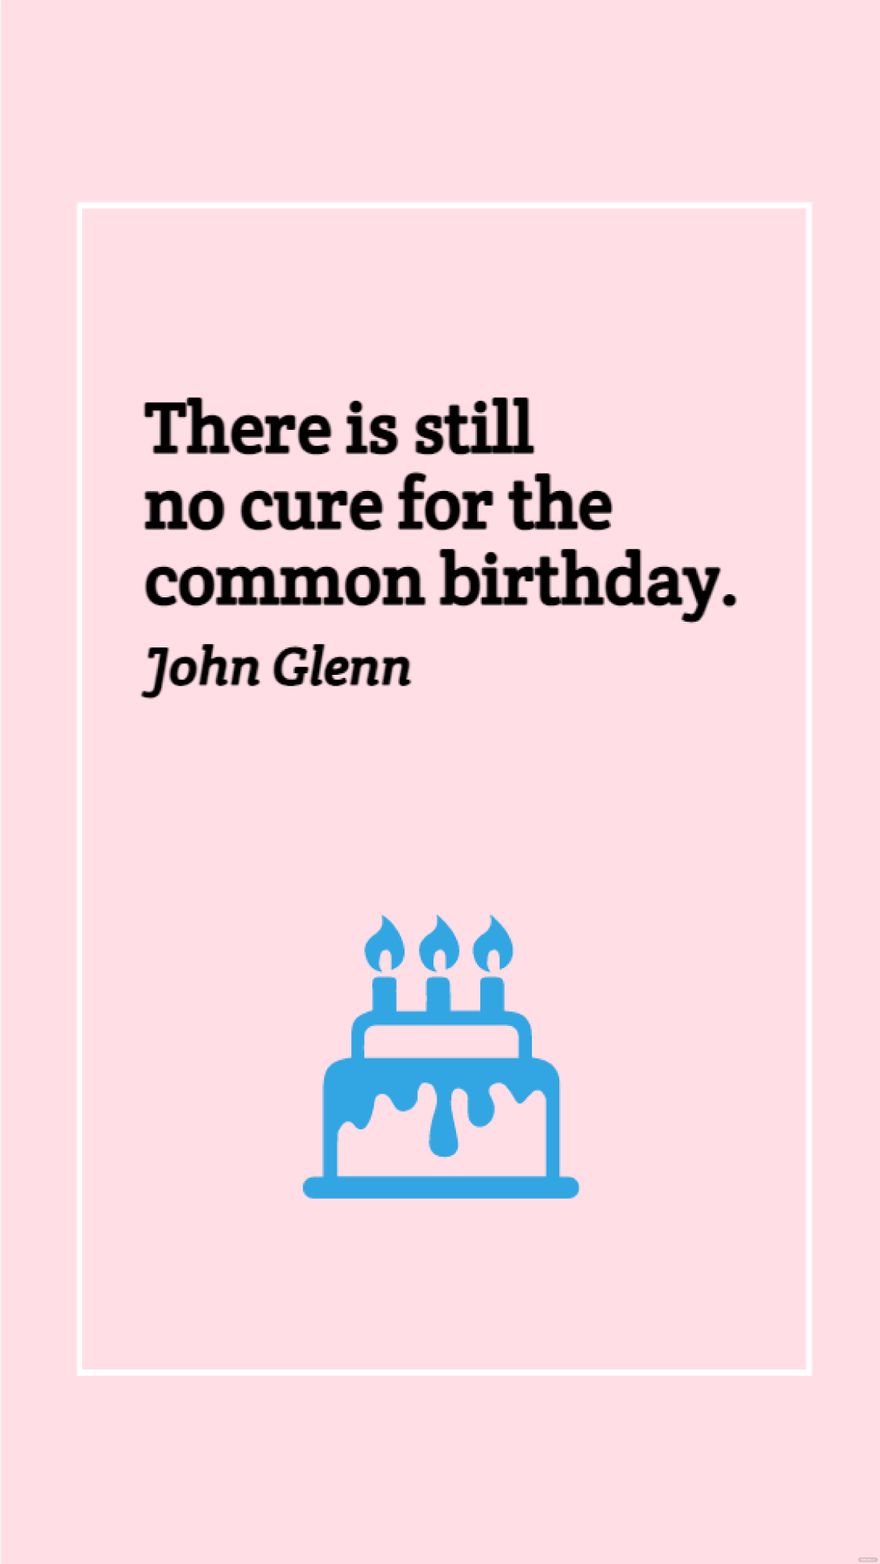 Free John Glenn - There is still no cure for the common birthday.